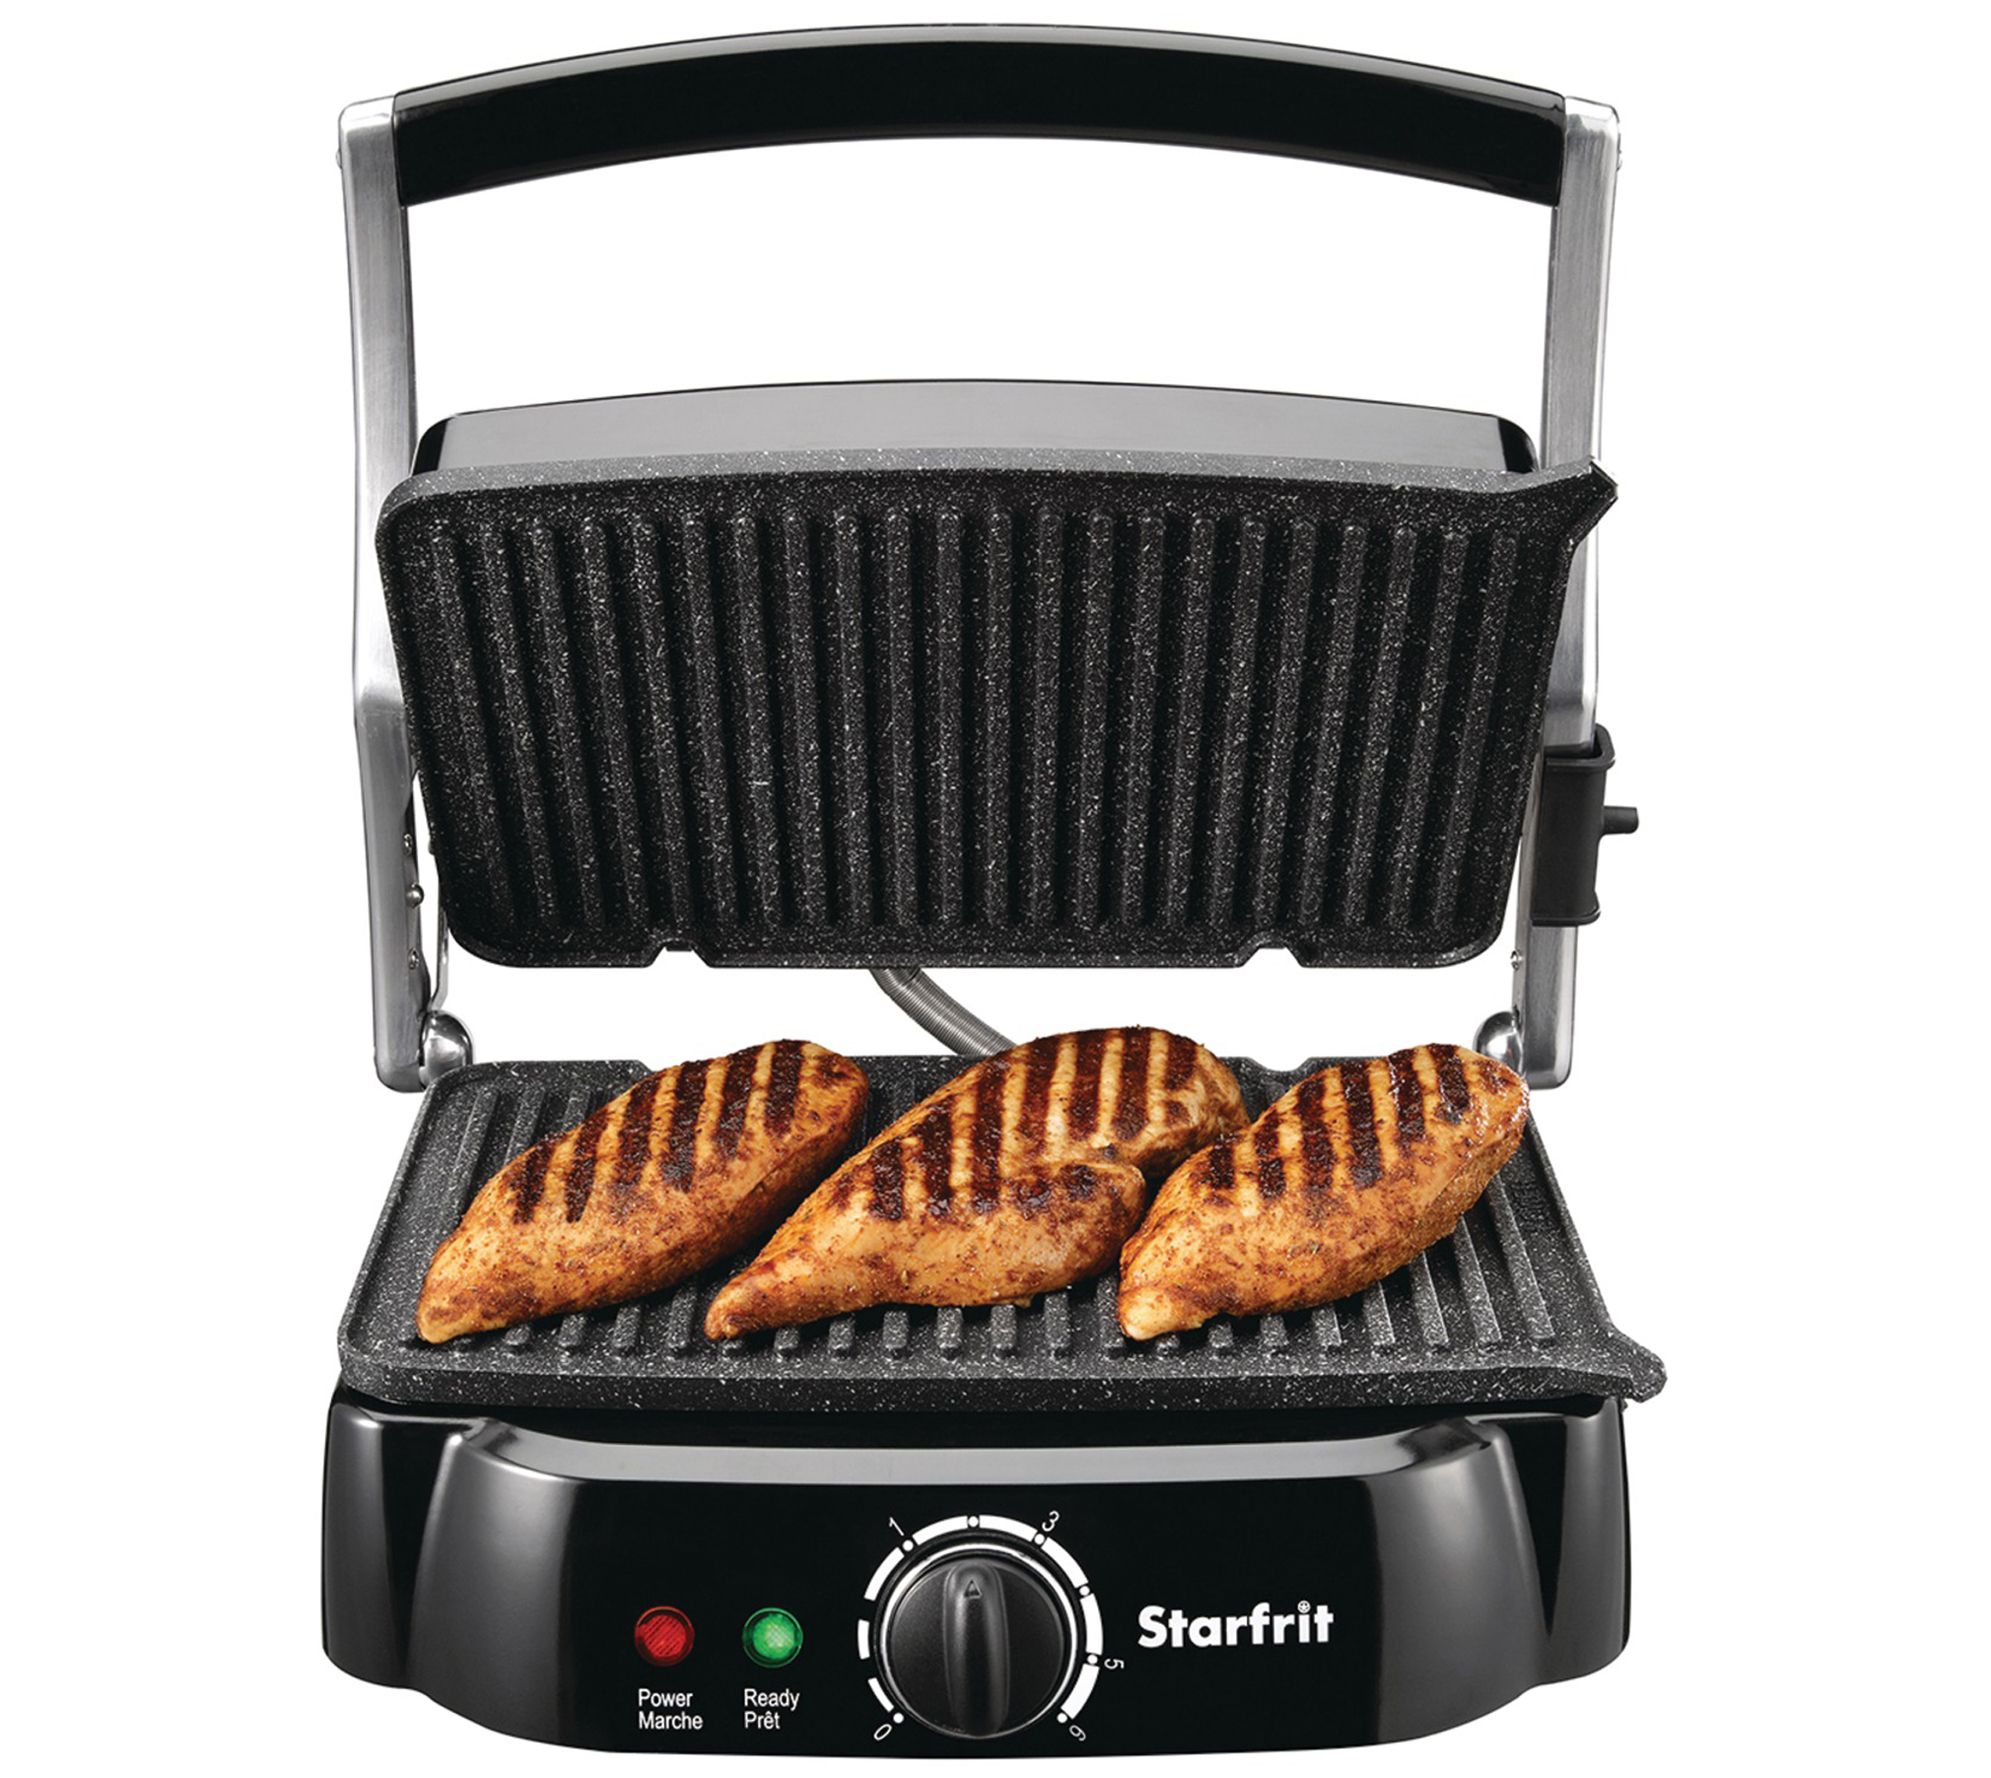 The Rock by Starfrit Indoor Smokeless Electric BBQ Grill